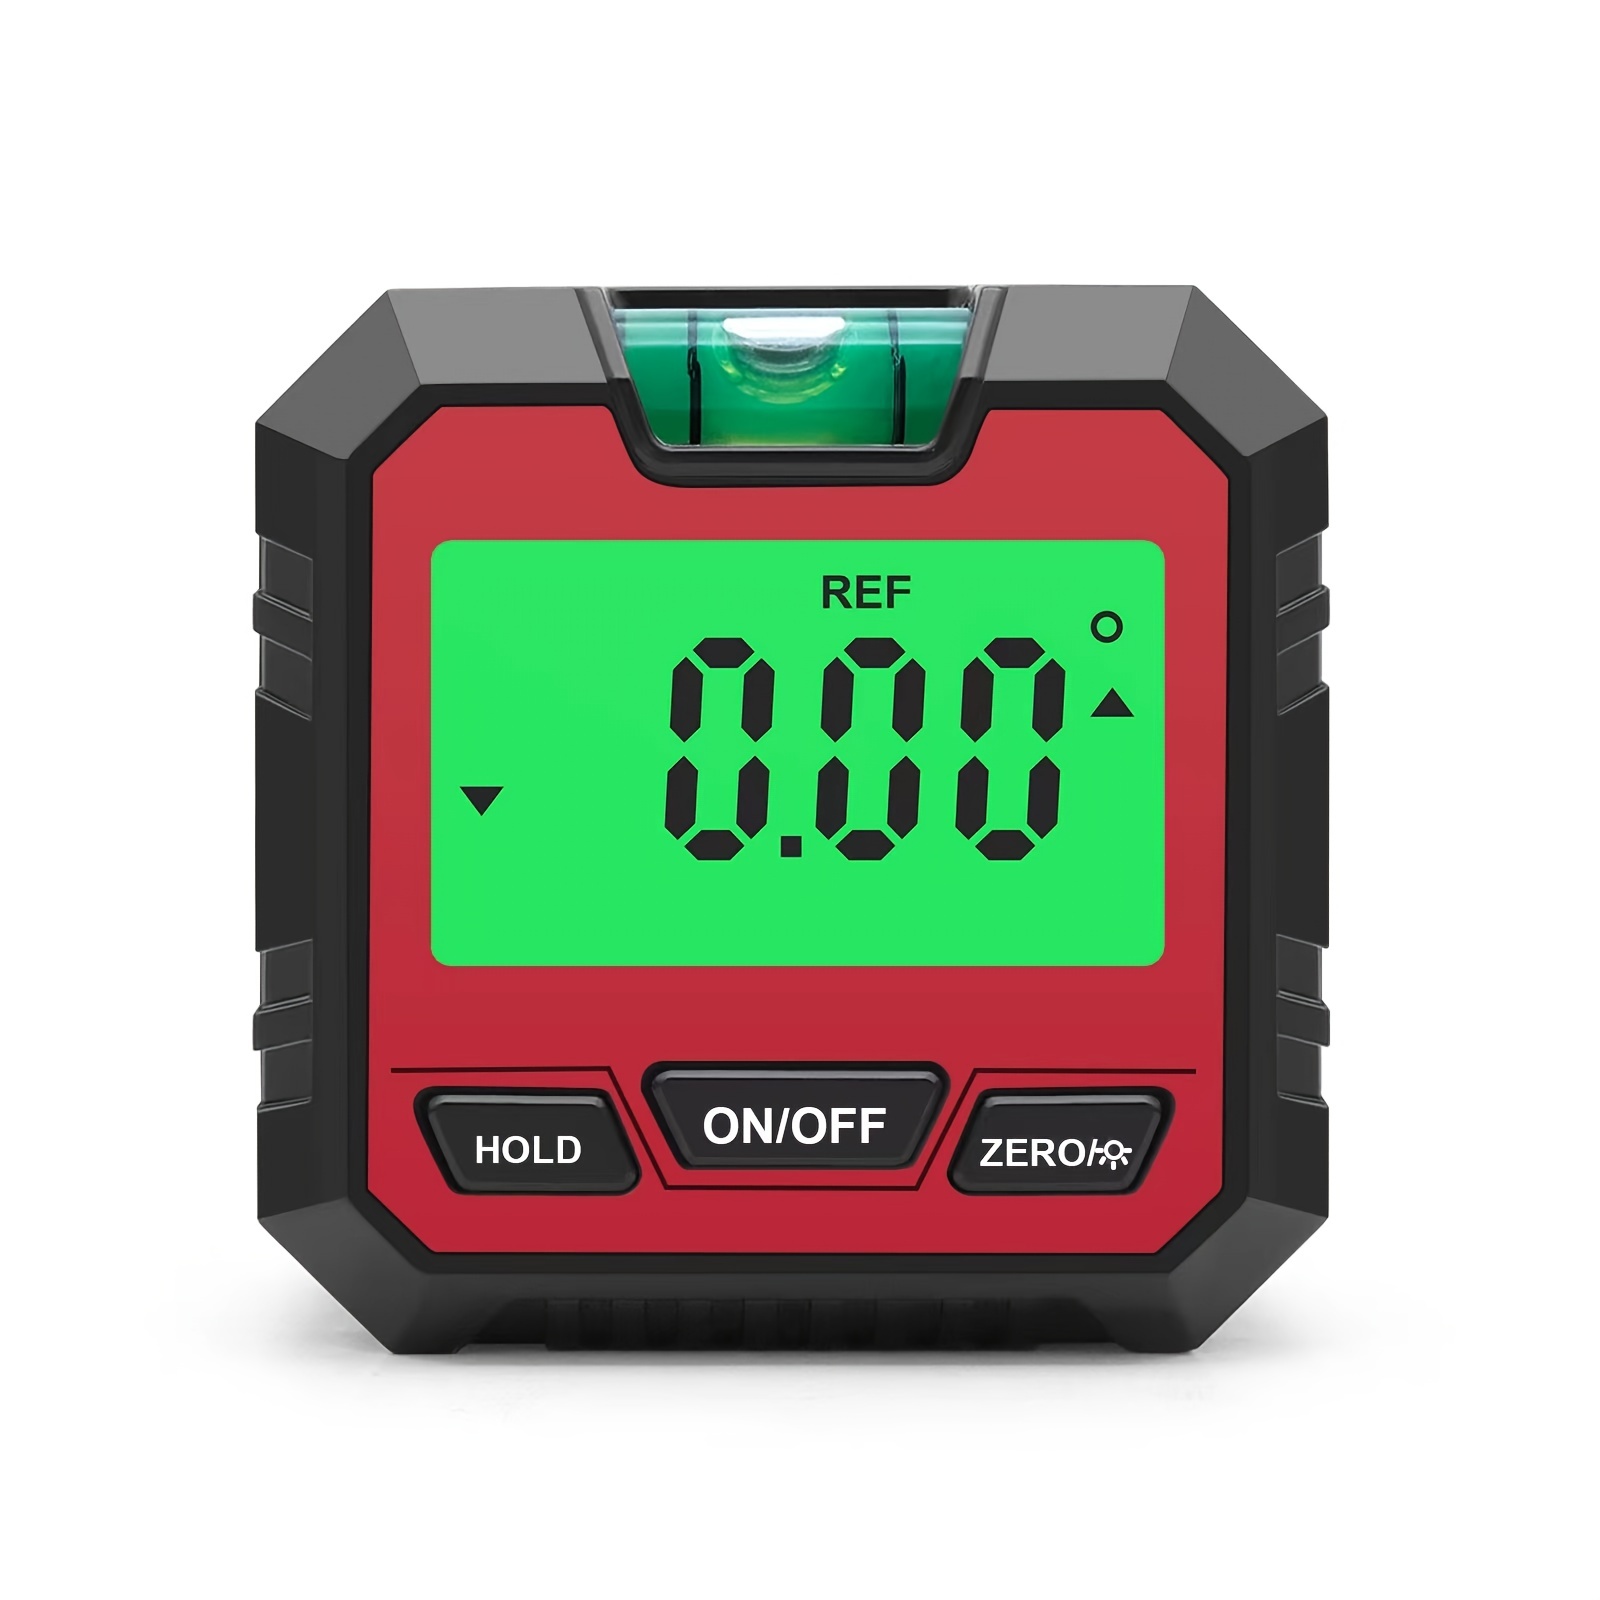 

Accurately Measure And Set Angles From 0-90 Degrees With This Digital Electronic Level And Angle Gauge!